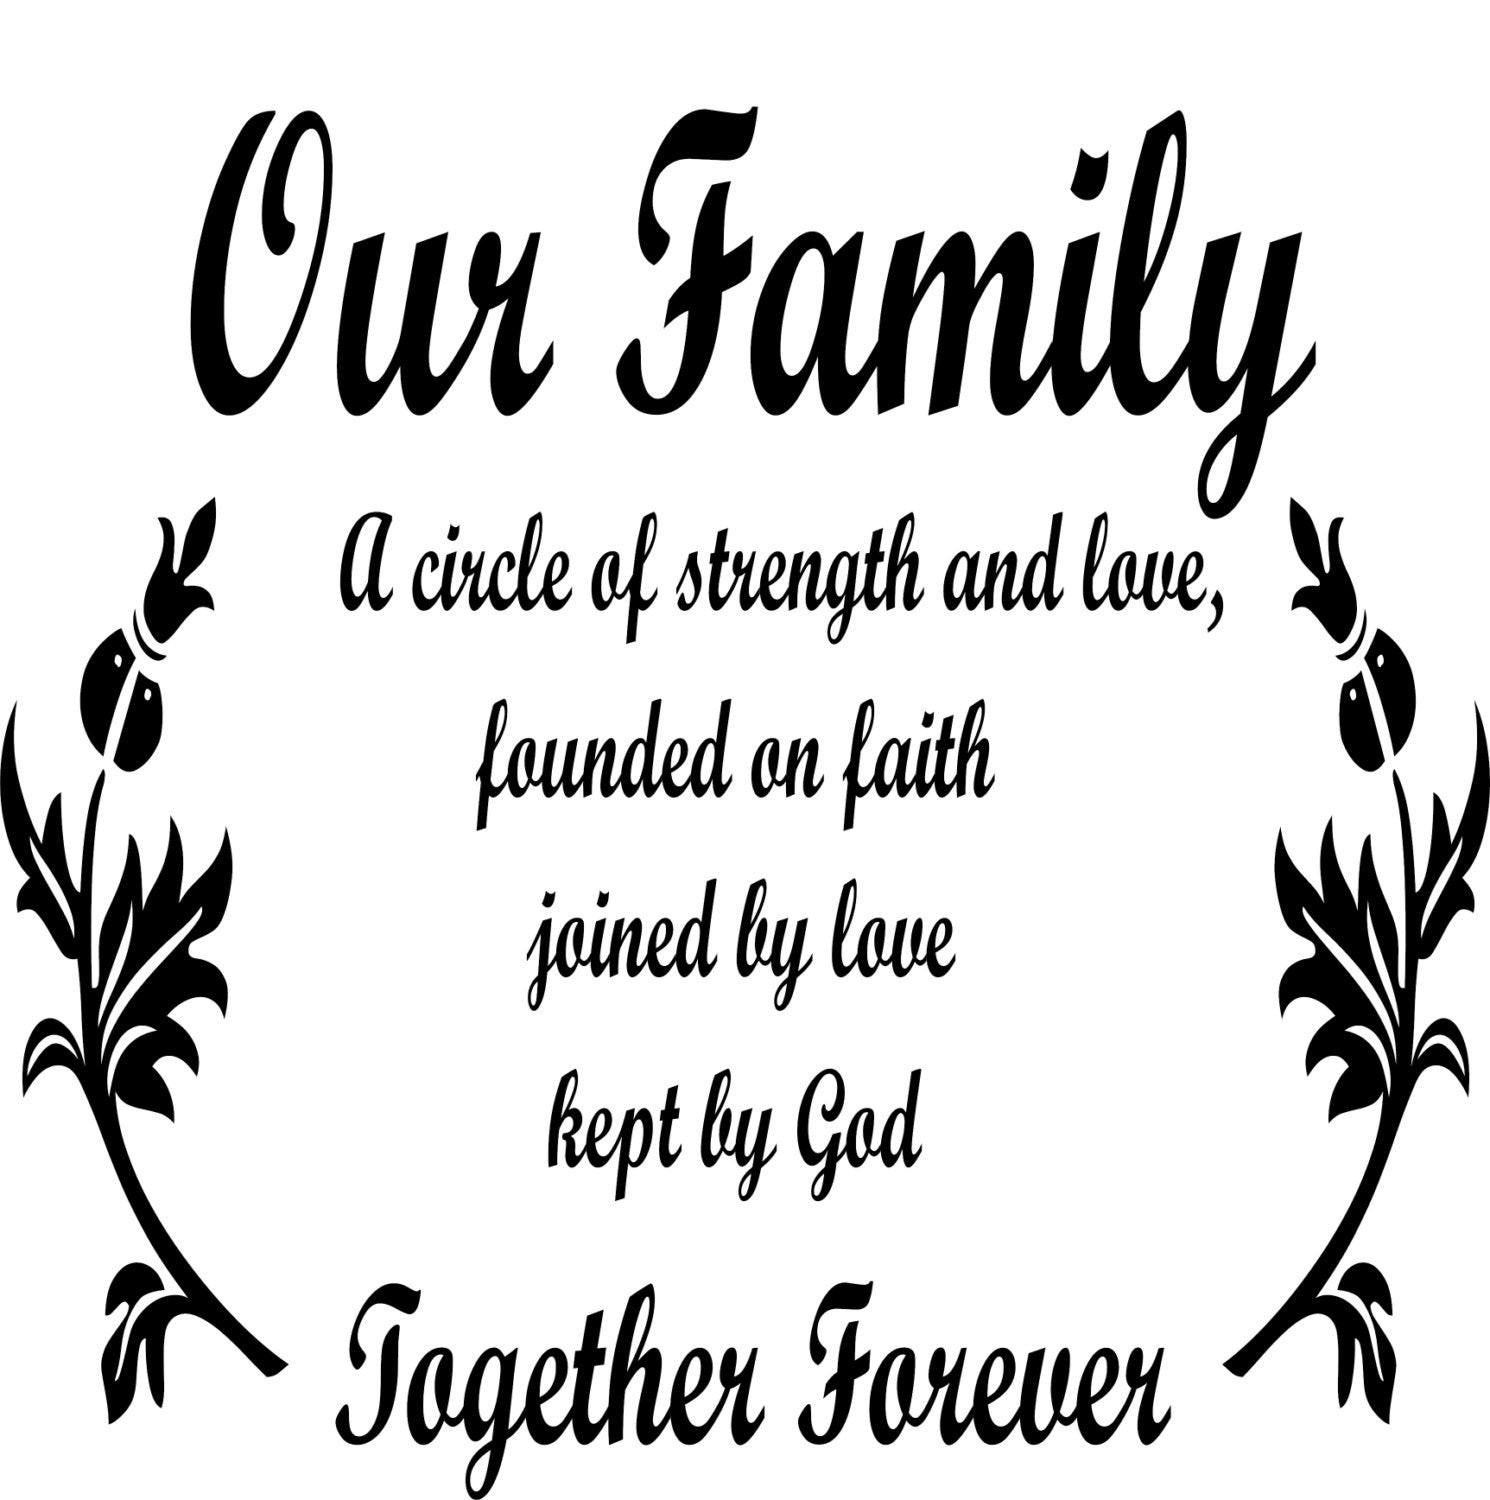 Quotes About Faith And Family
 Our Family A Circle of Strength Faith Love Kept By God